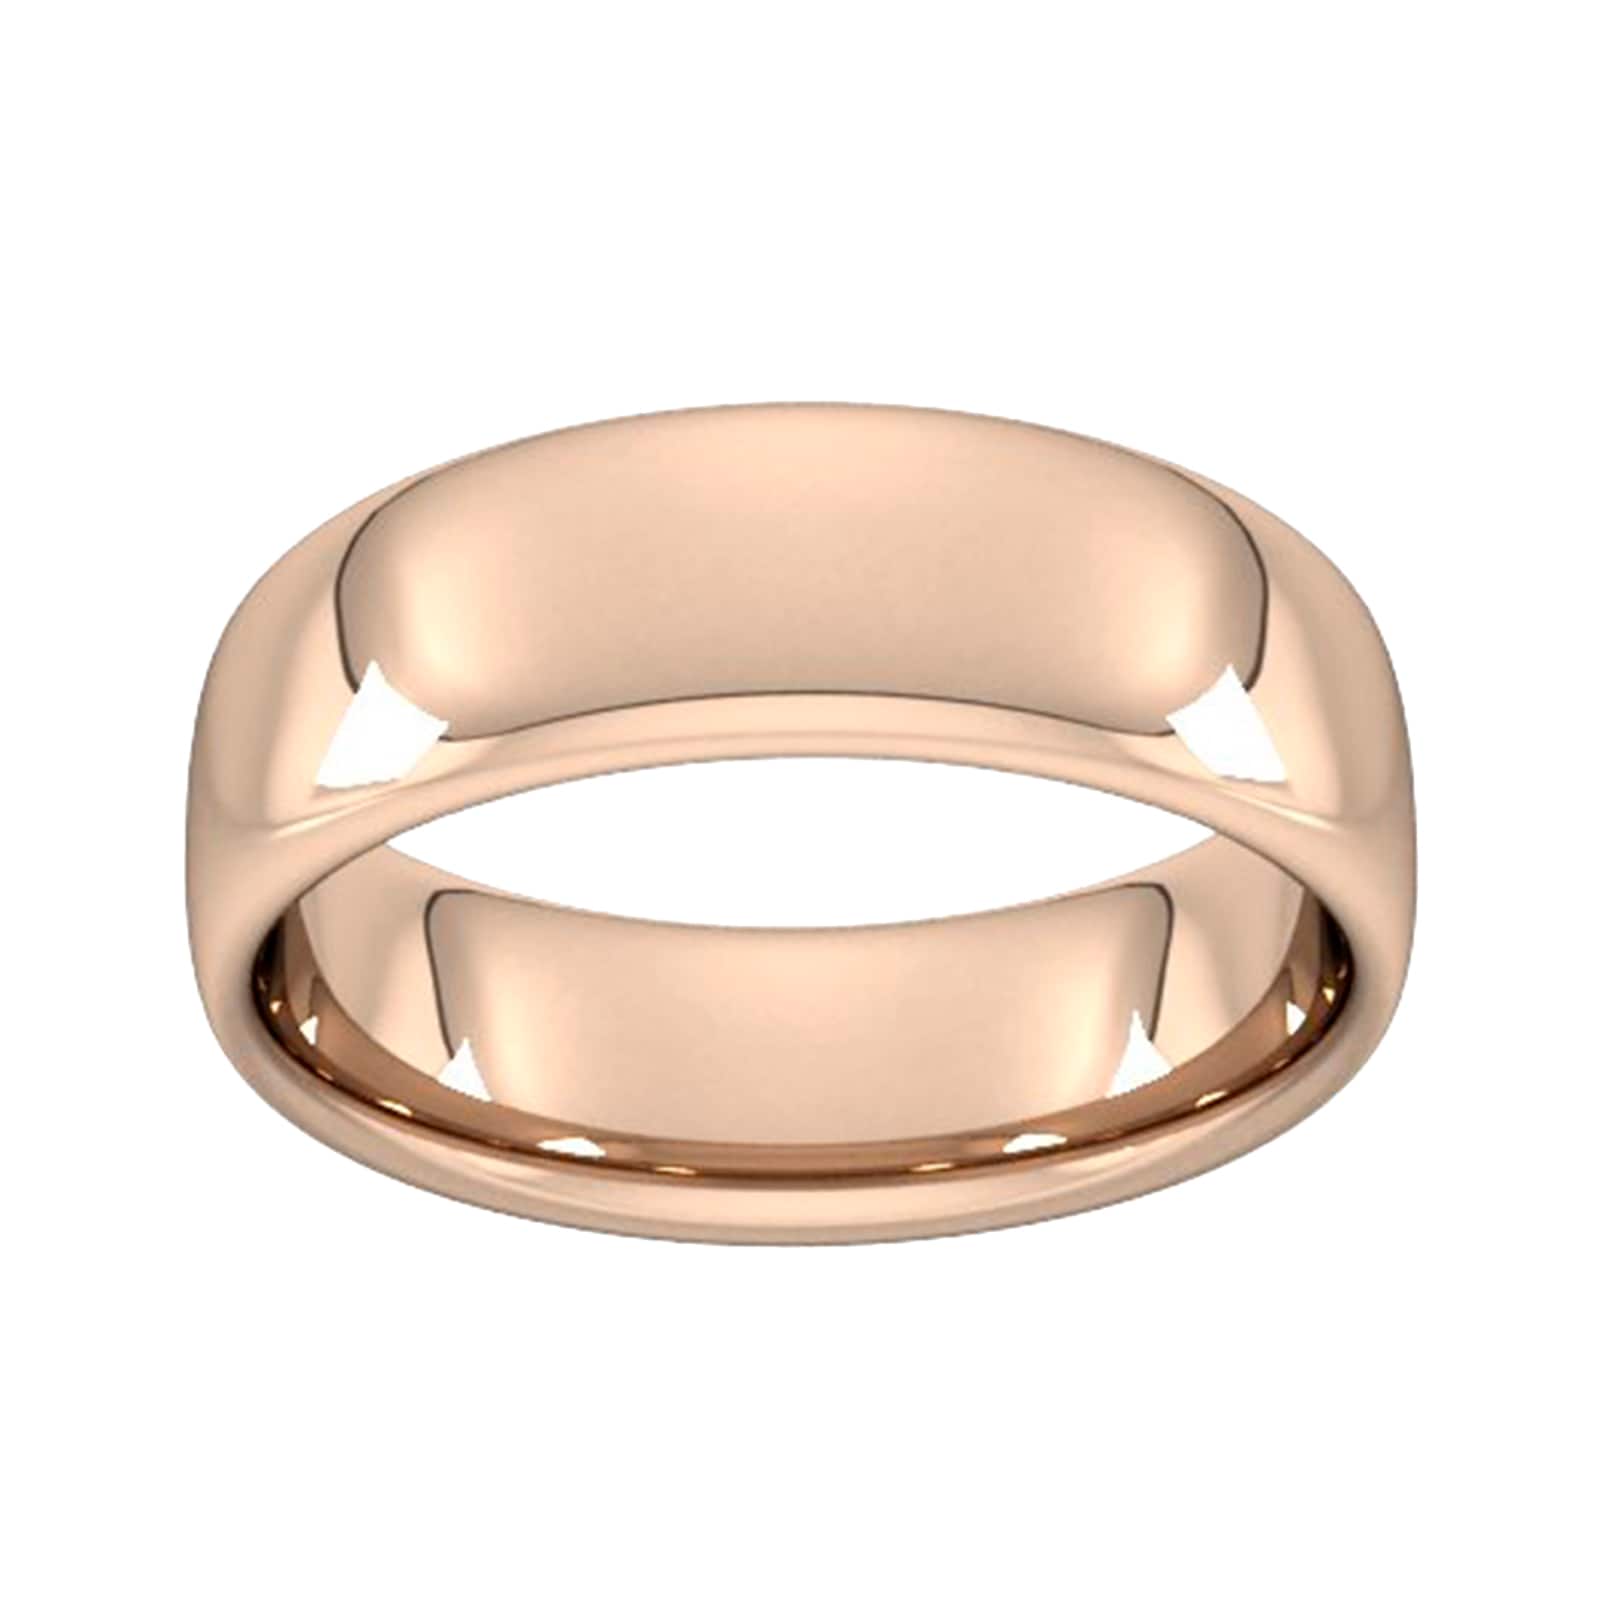 7mm Slight Court Heavy Wedding Ring In 18 Carat Rose Gold - Ring Size W